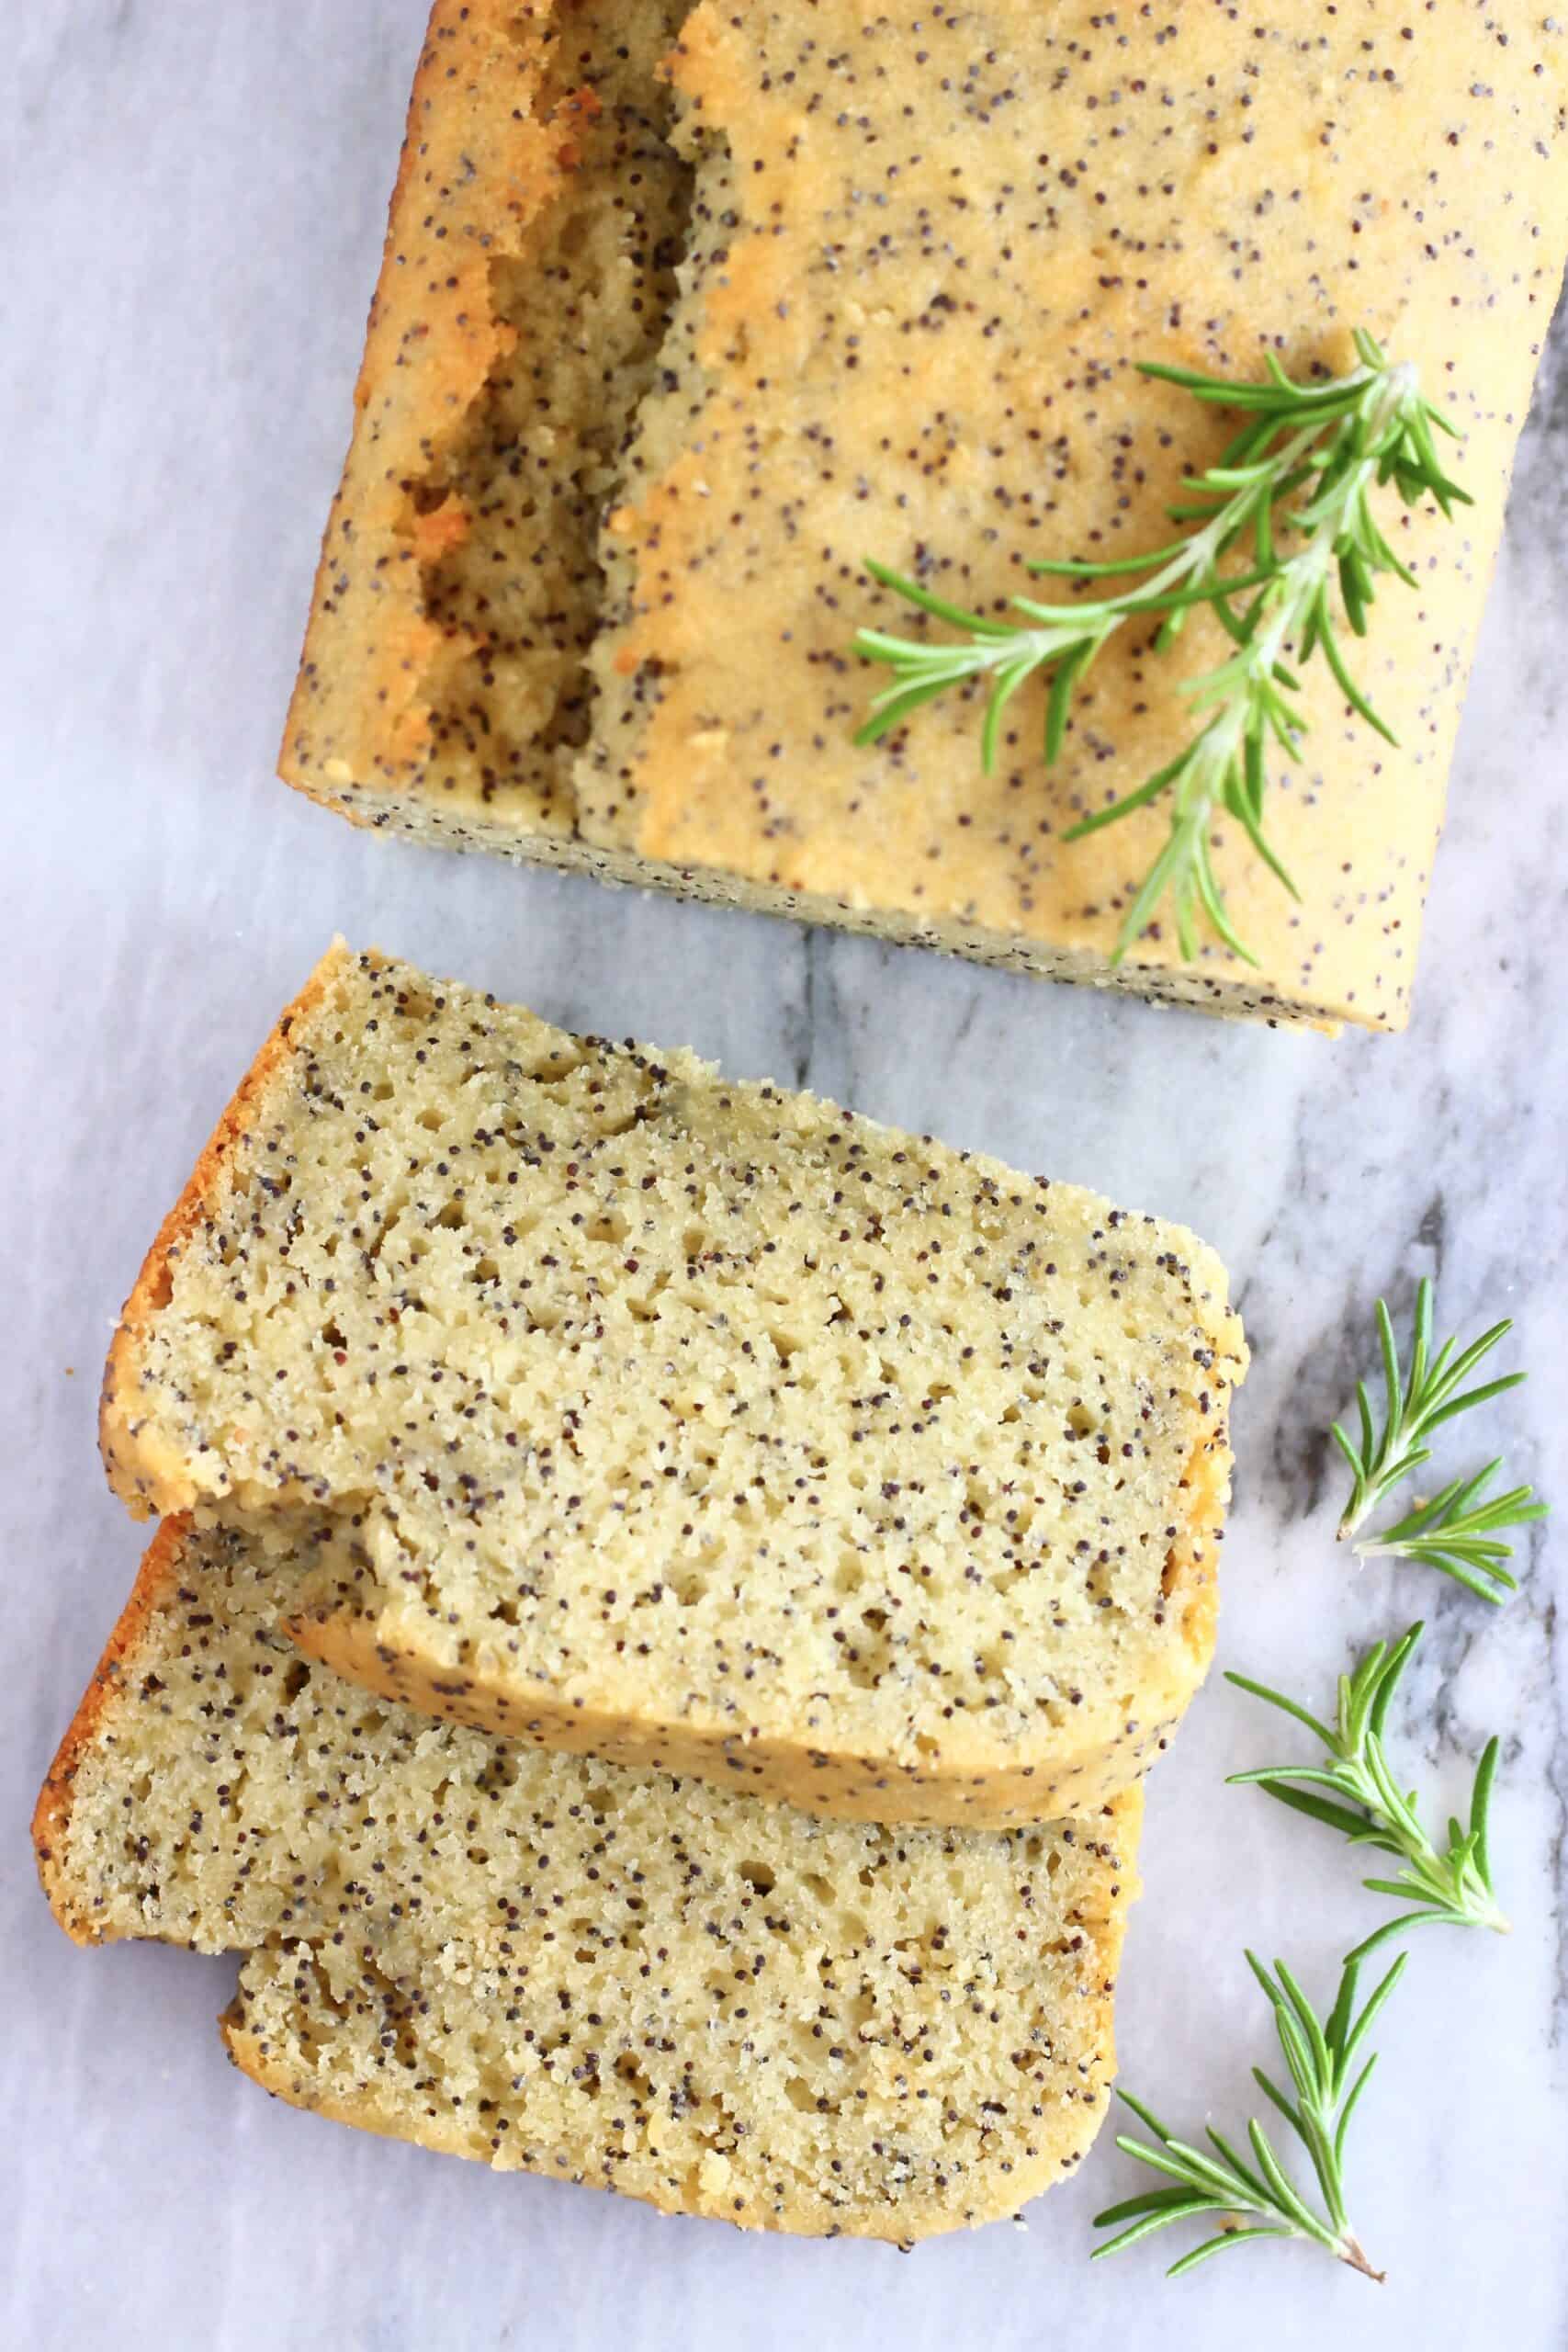 A loaf of gluten-free vegan orange poppy seed bread with two slices next to it